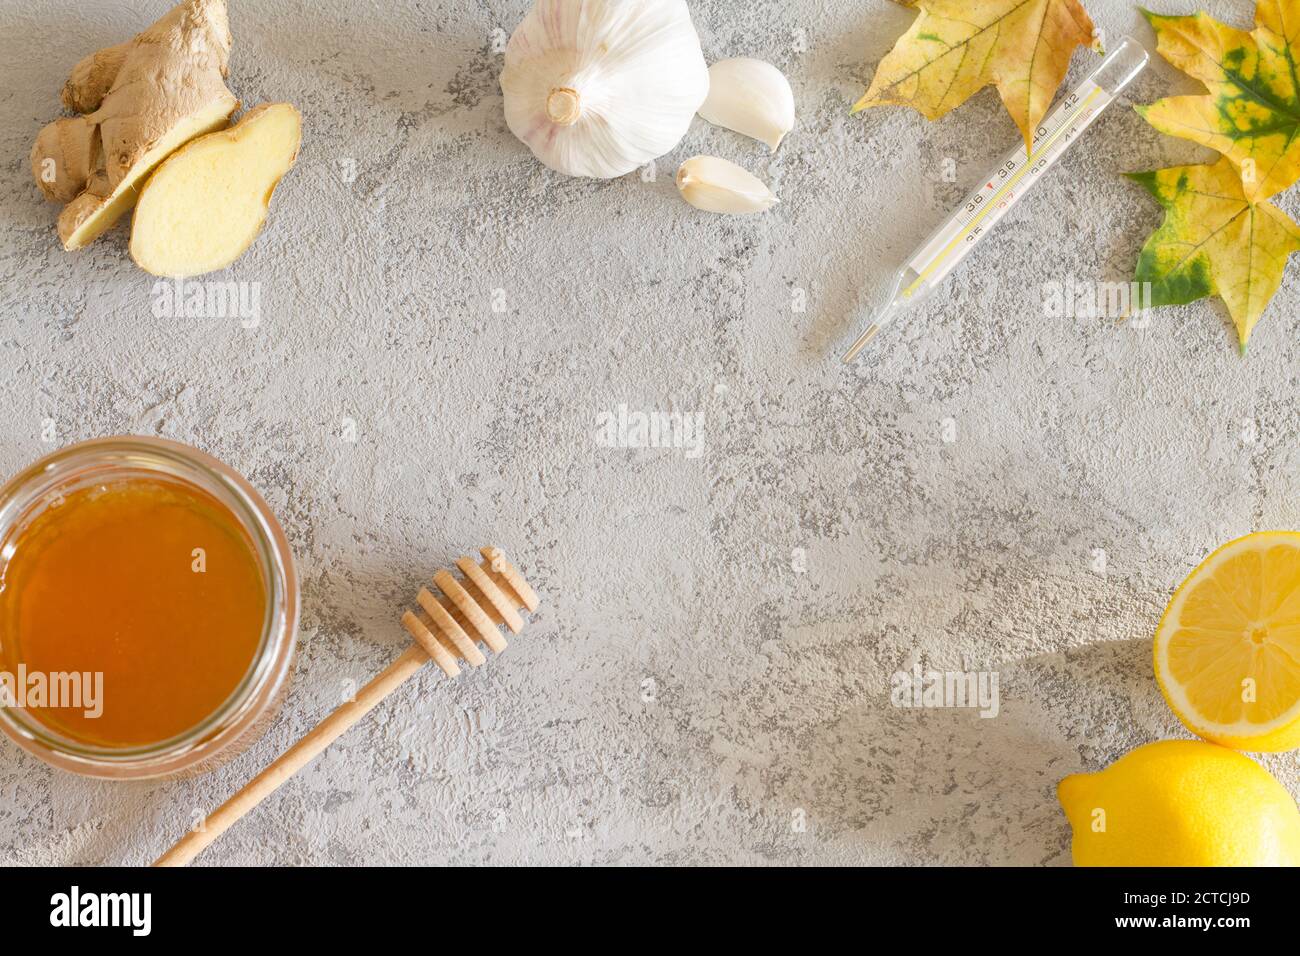 Home remedies for cold and flu Stock Photo